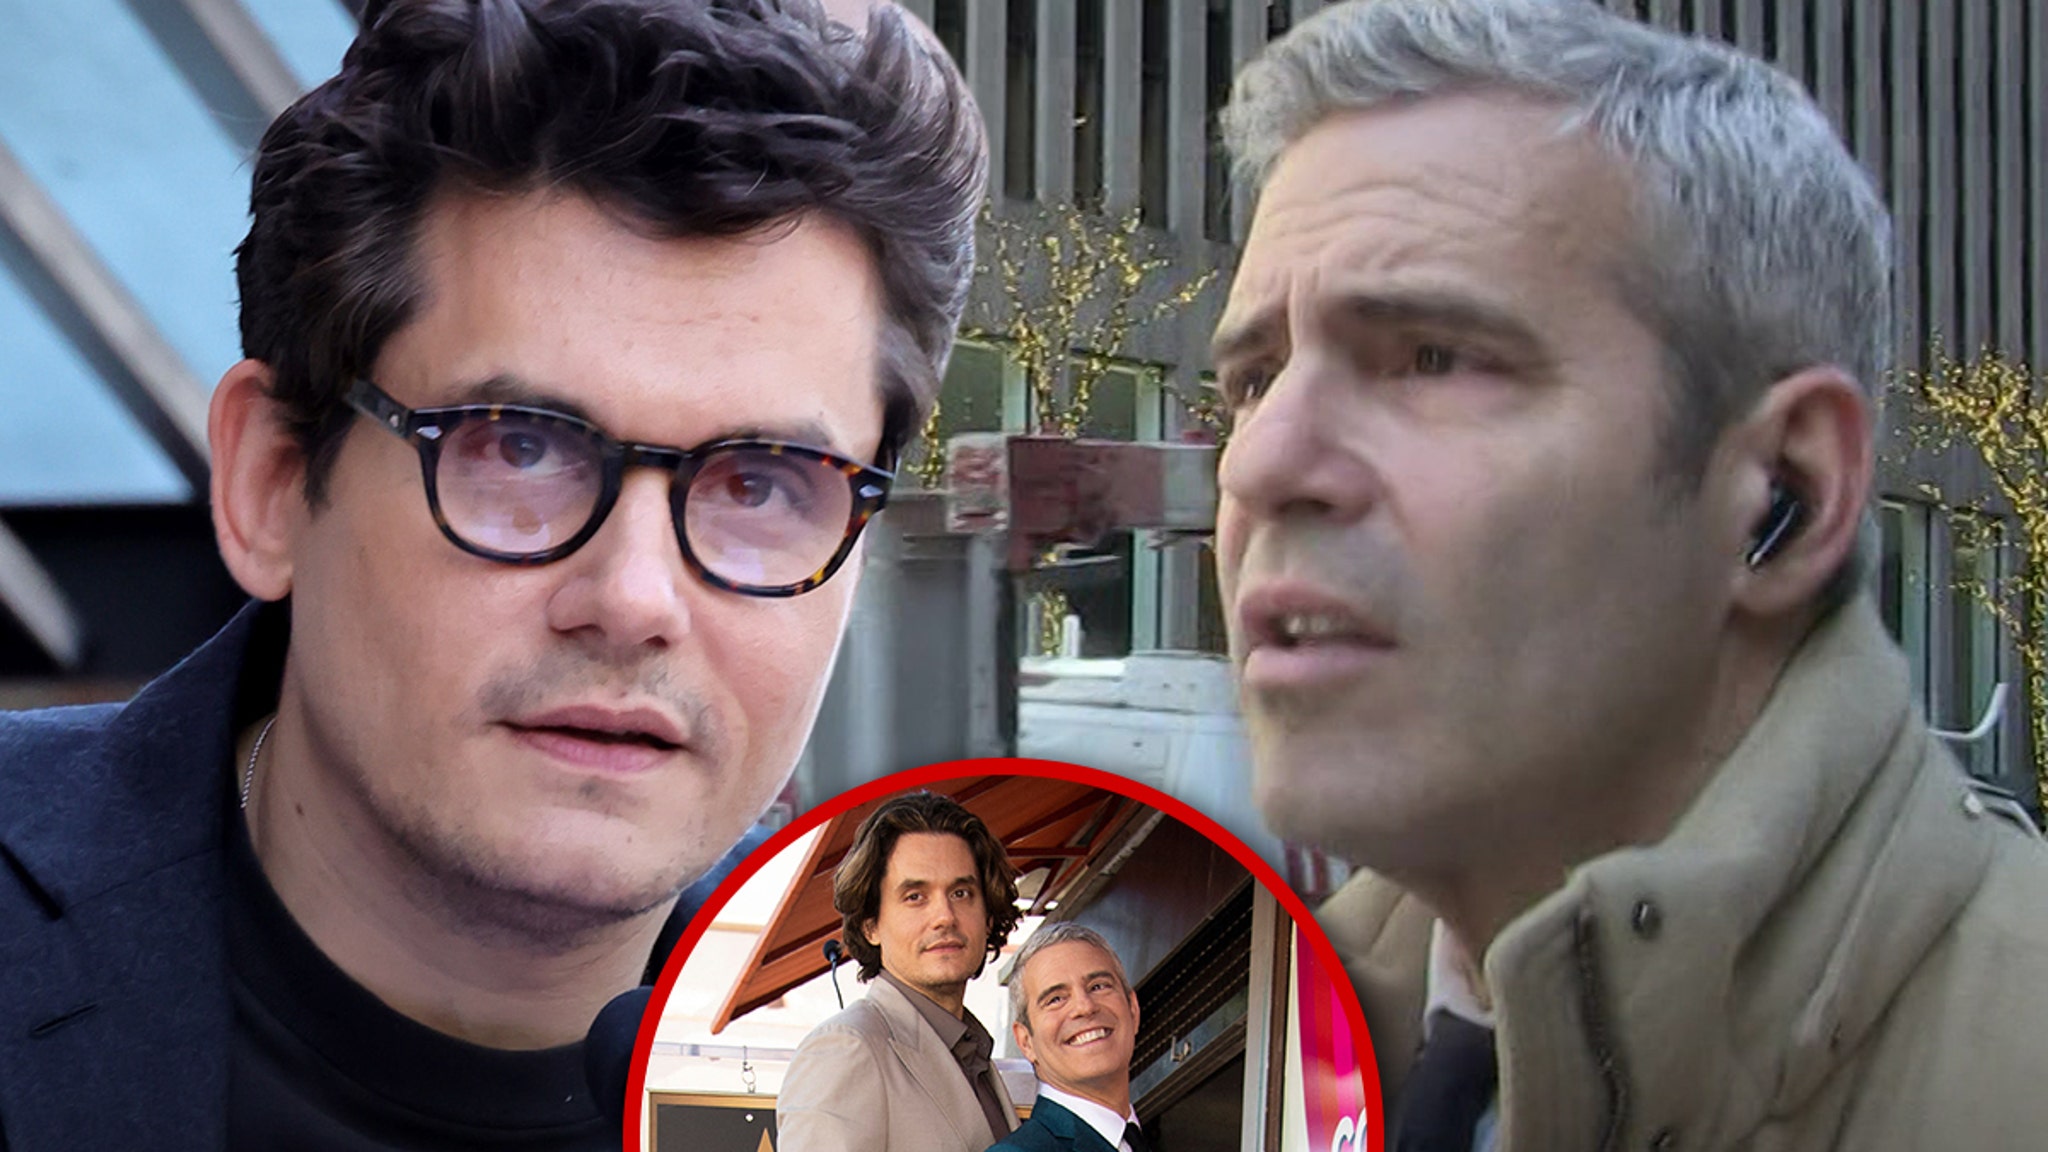 John Mayer's Pissed Journalist Asked Andy Cohen If They Hook Up